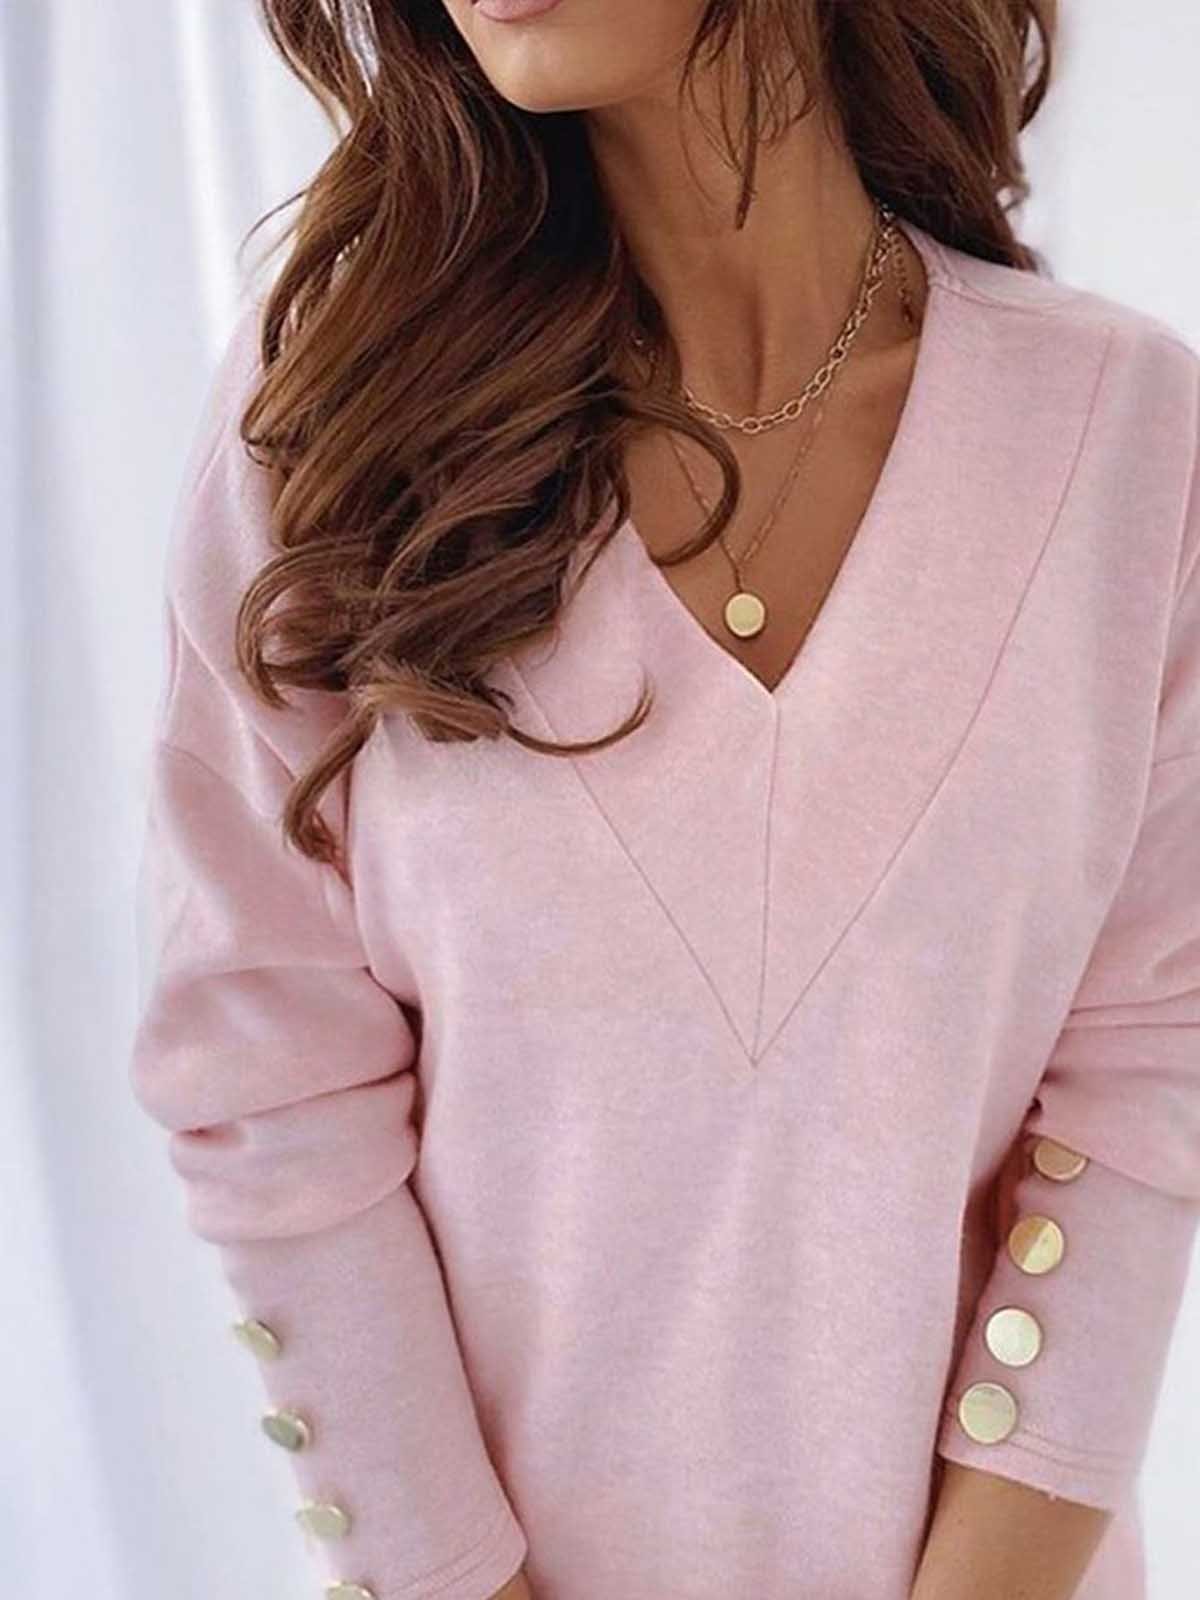 Casual Loose V Neck Long Sleeve Top